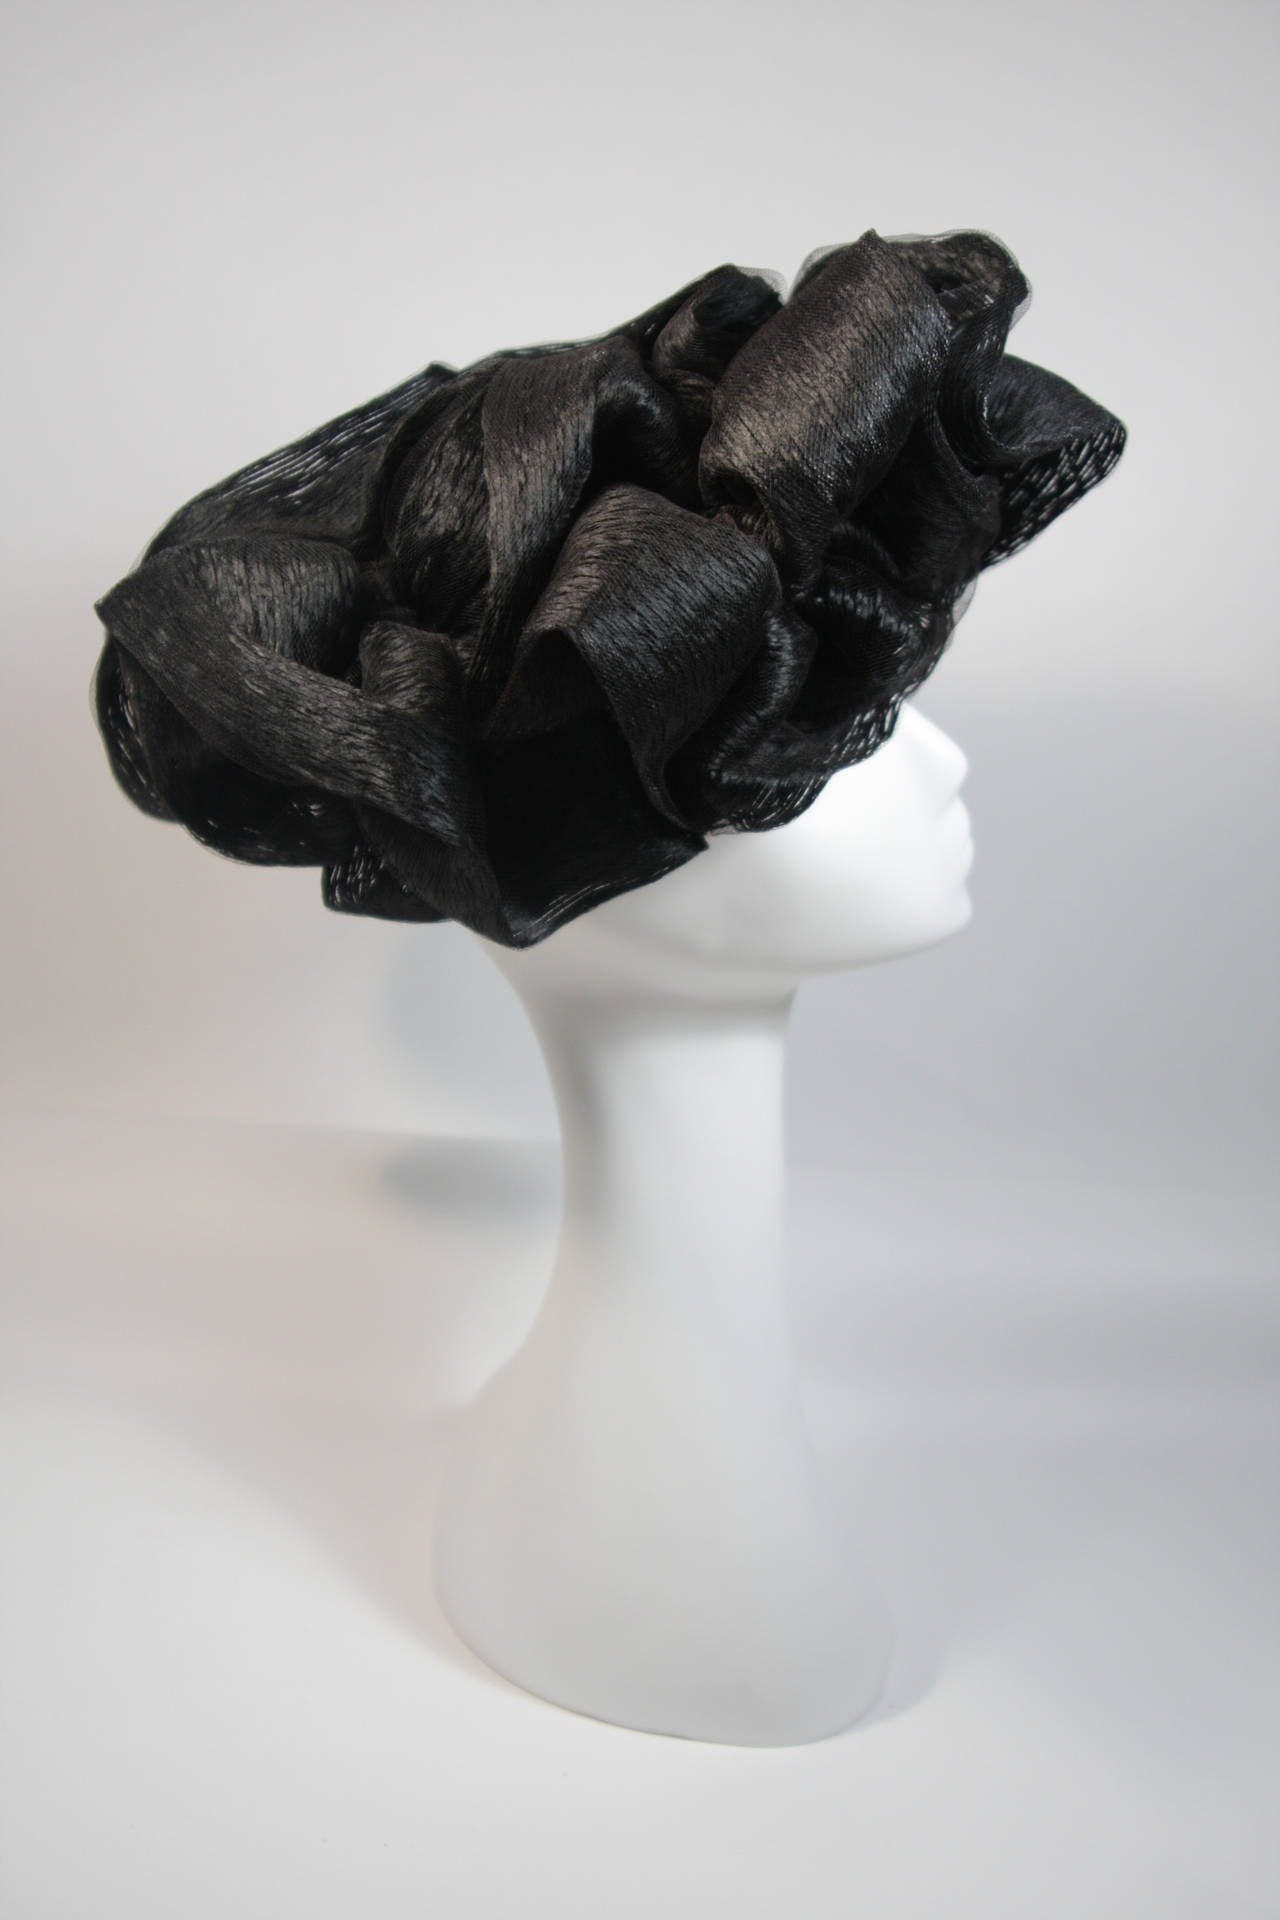 Men's Maria Pia Rome Black Bouffant Curl Hat with Ribbon and Net